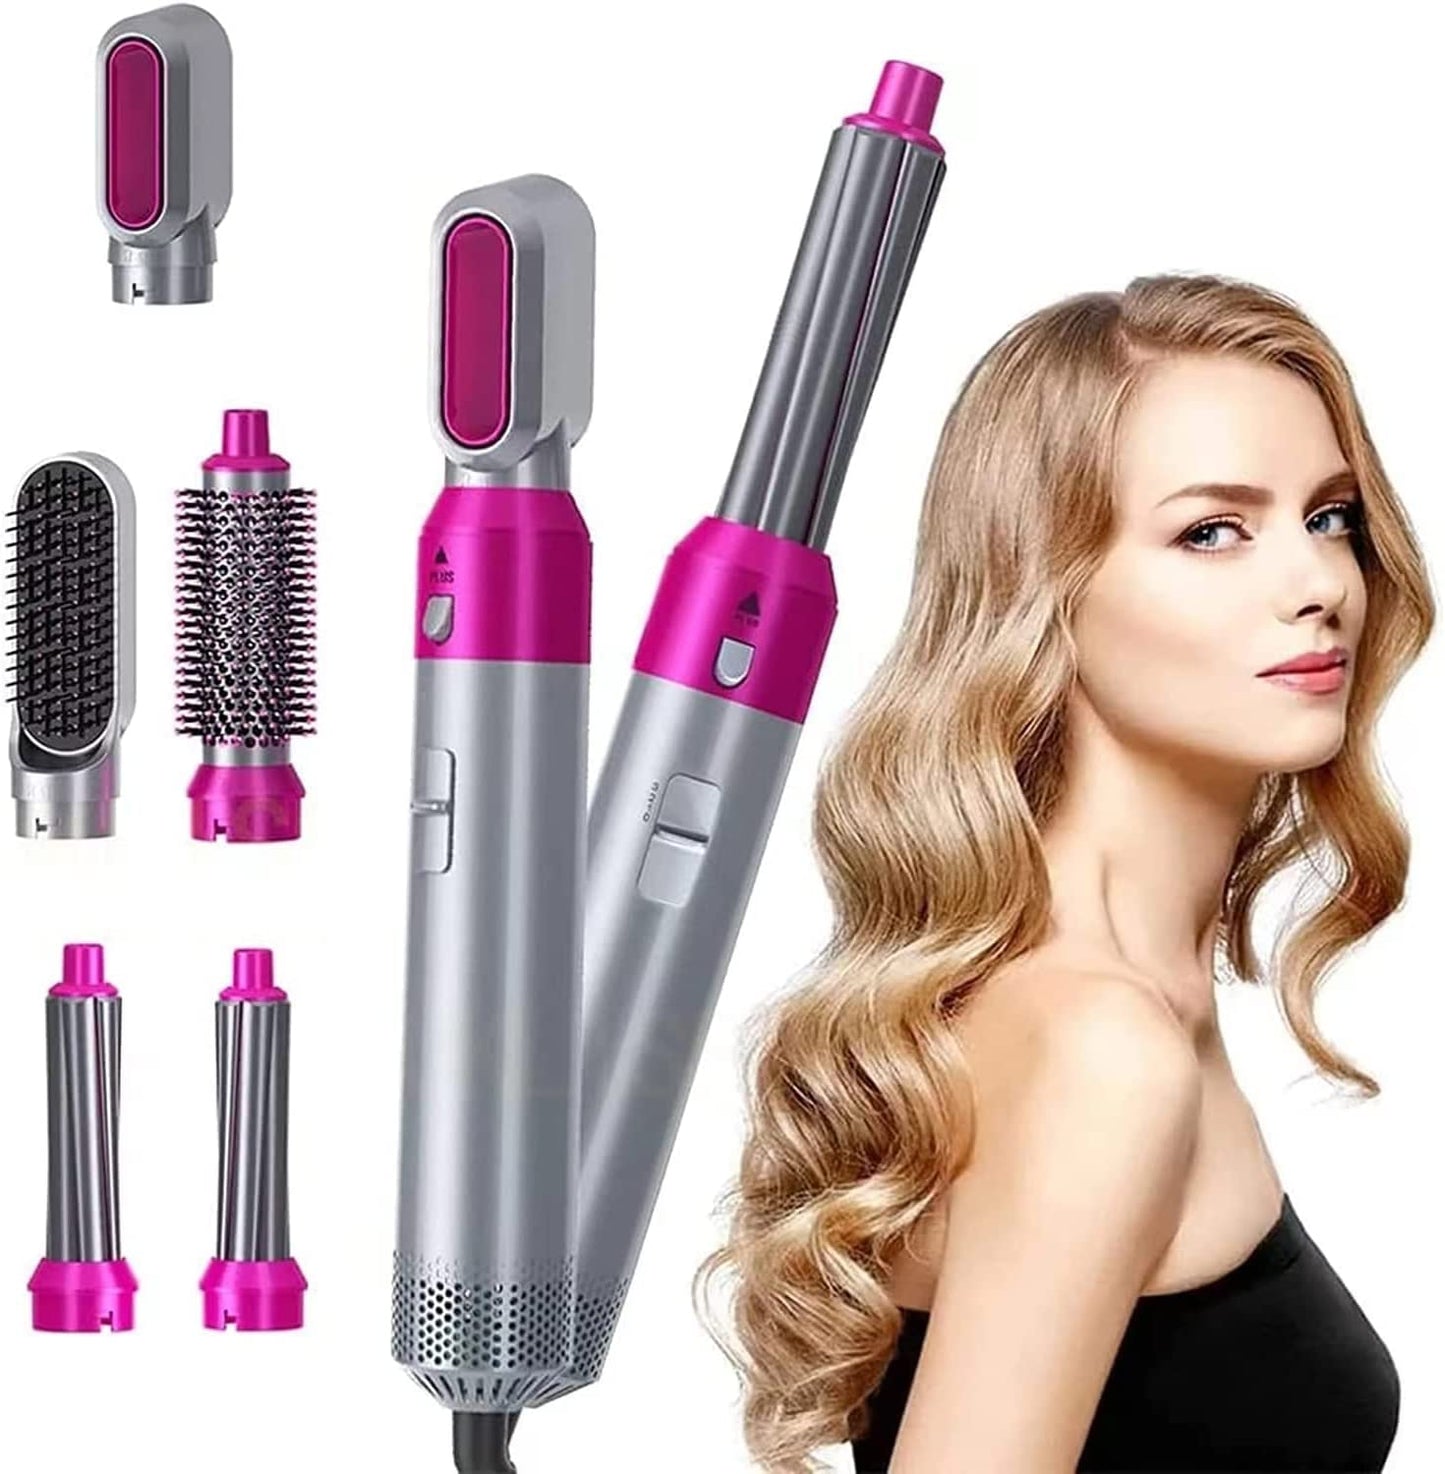 One Step 5 in 1 Multifunctional Hair Dryer Styling Tool